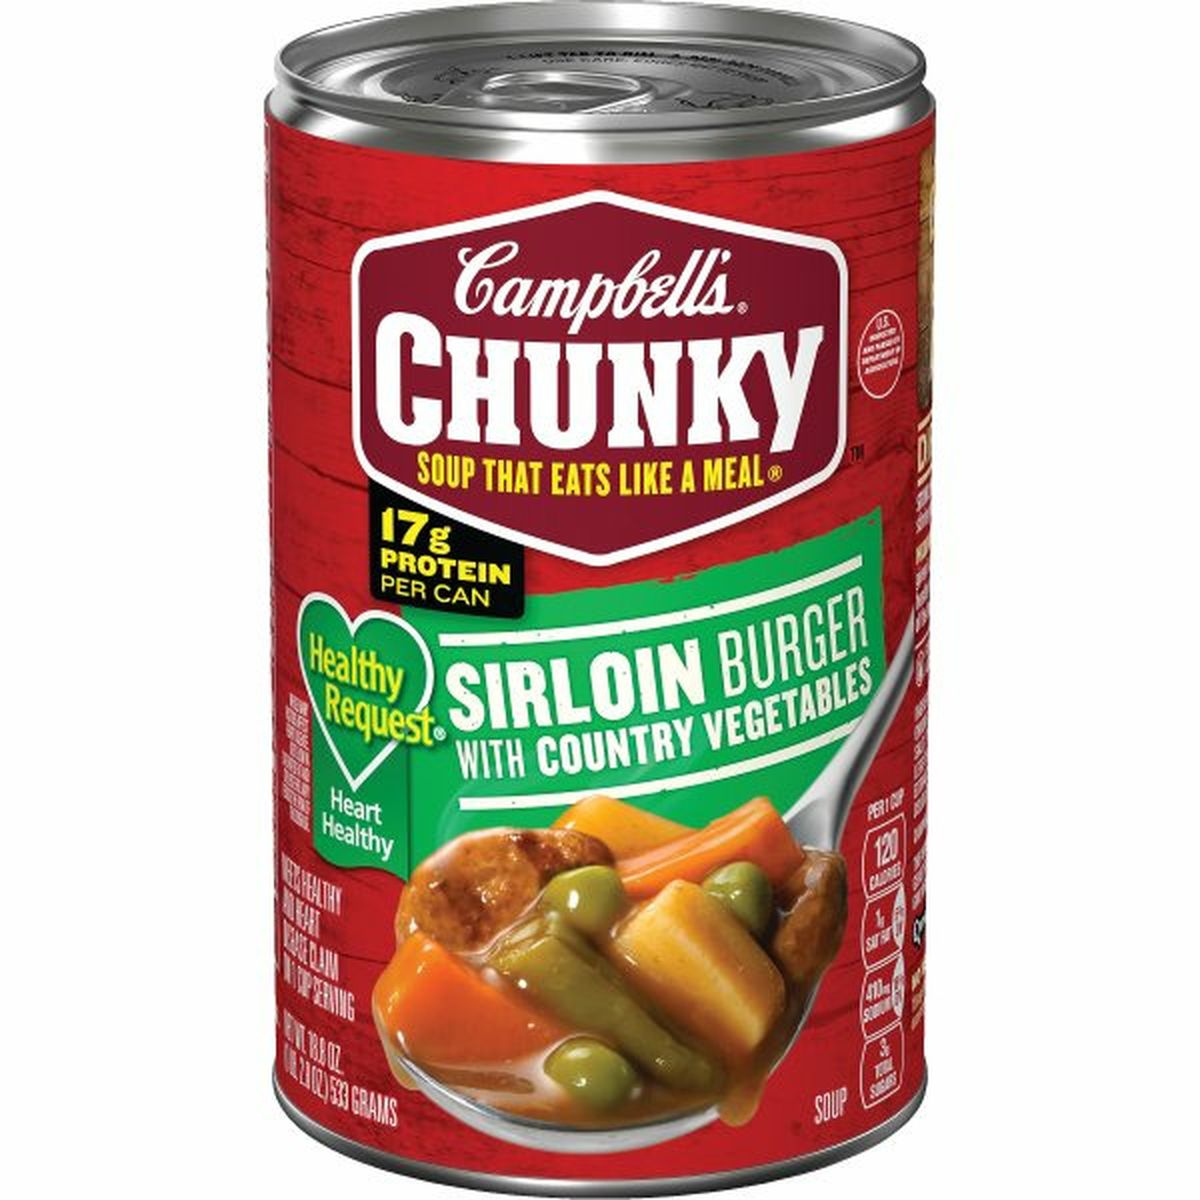 Calories in Campbell'ss Chunkys Healthy Requests Chunky Healthy Request Sirloin Burger with Country Vegetables Soup